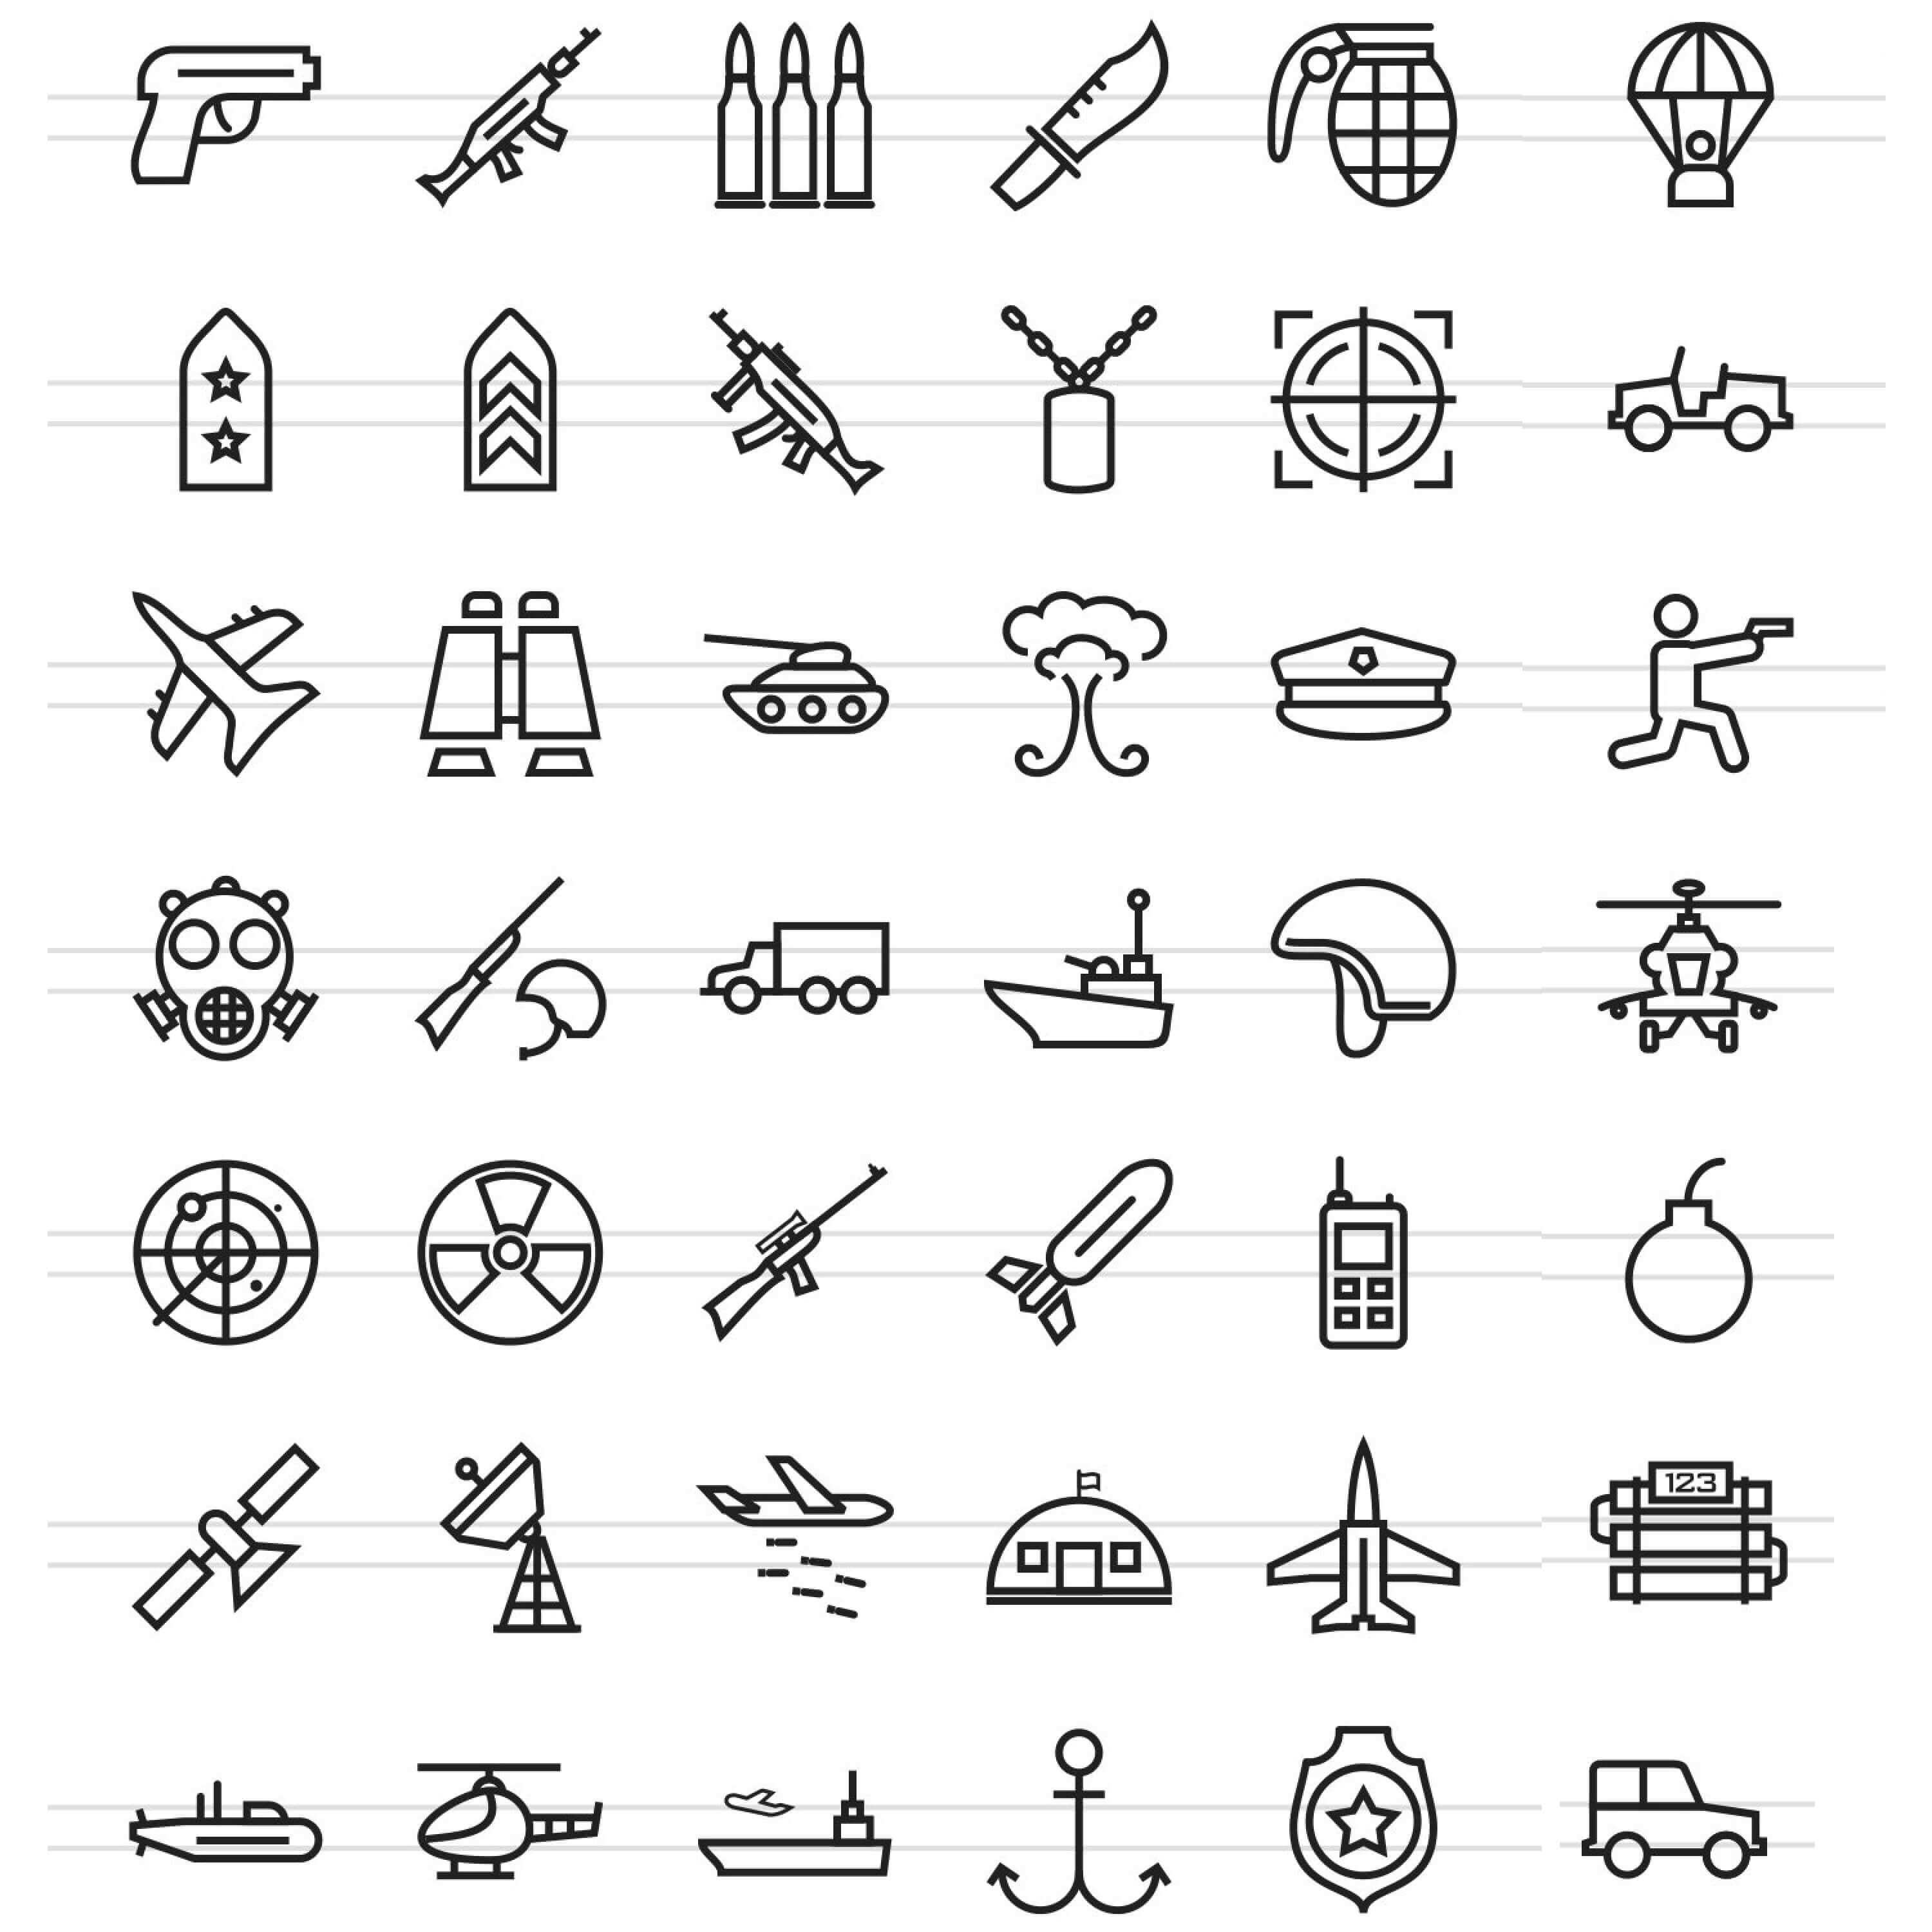 Icons with bunkers, helmets, explosions - and everything related to war.